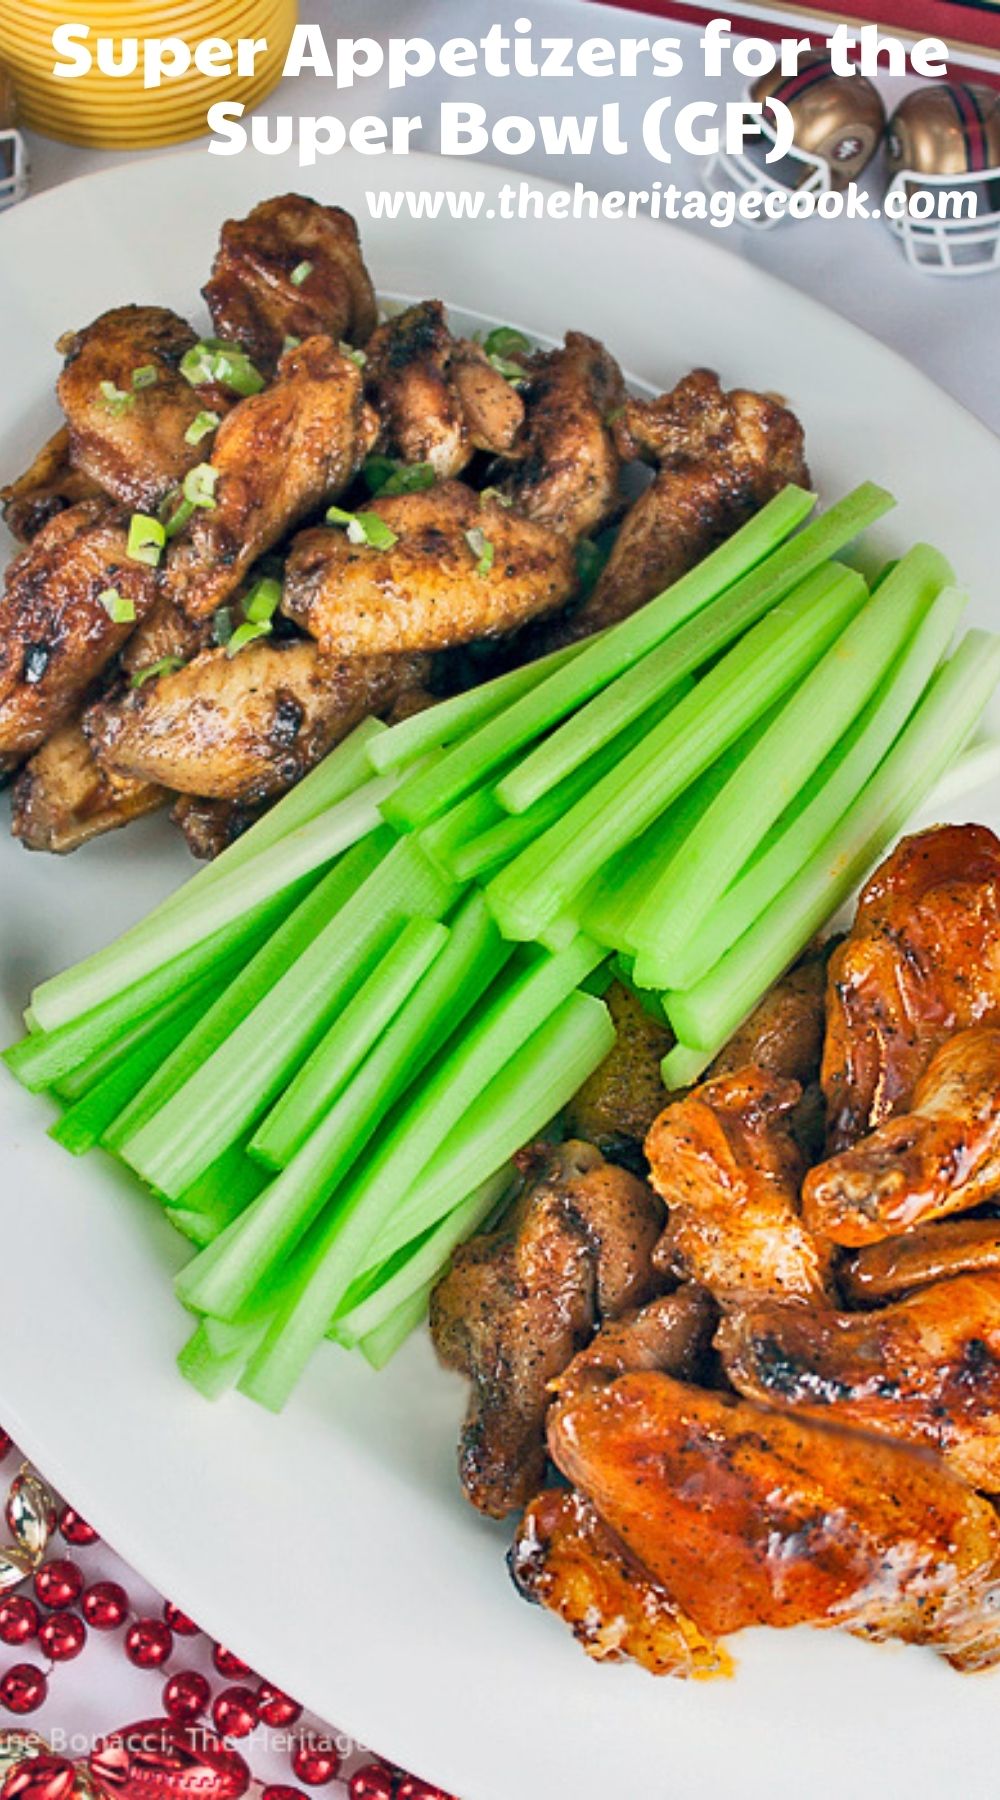 Super Appetizers for Game Day – Wings & Dip; 2021 Jane Bonacci, The Heritage Cook